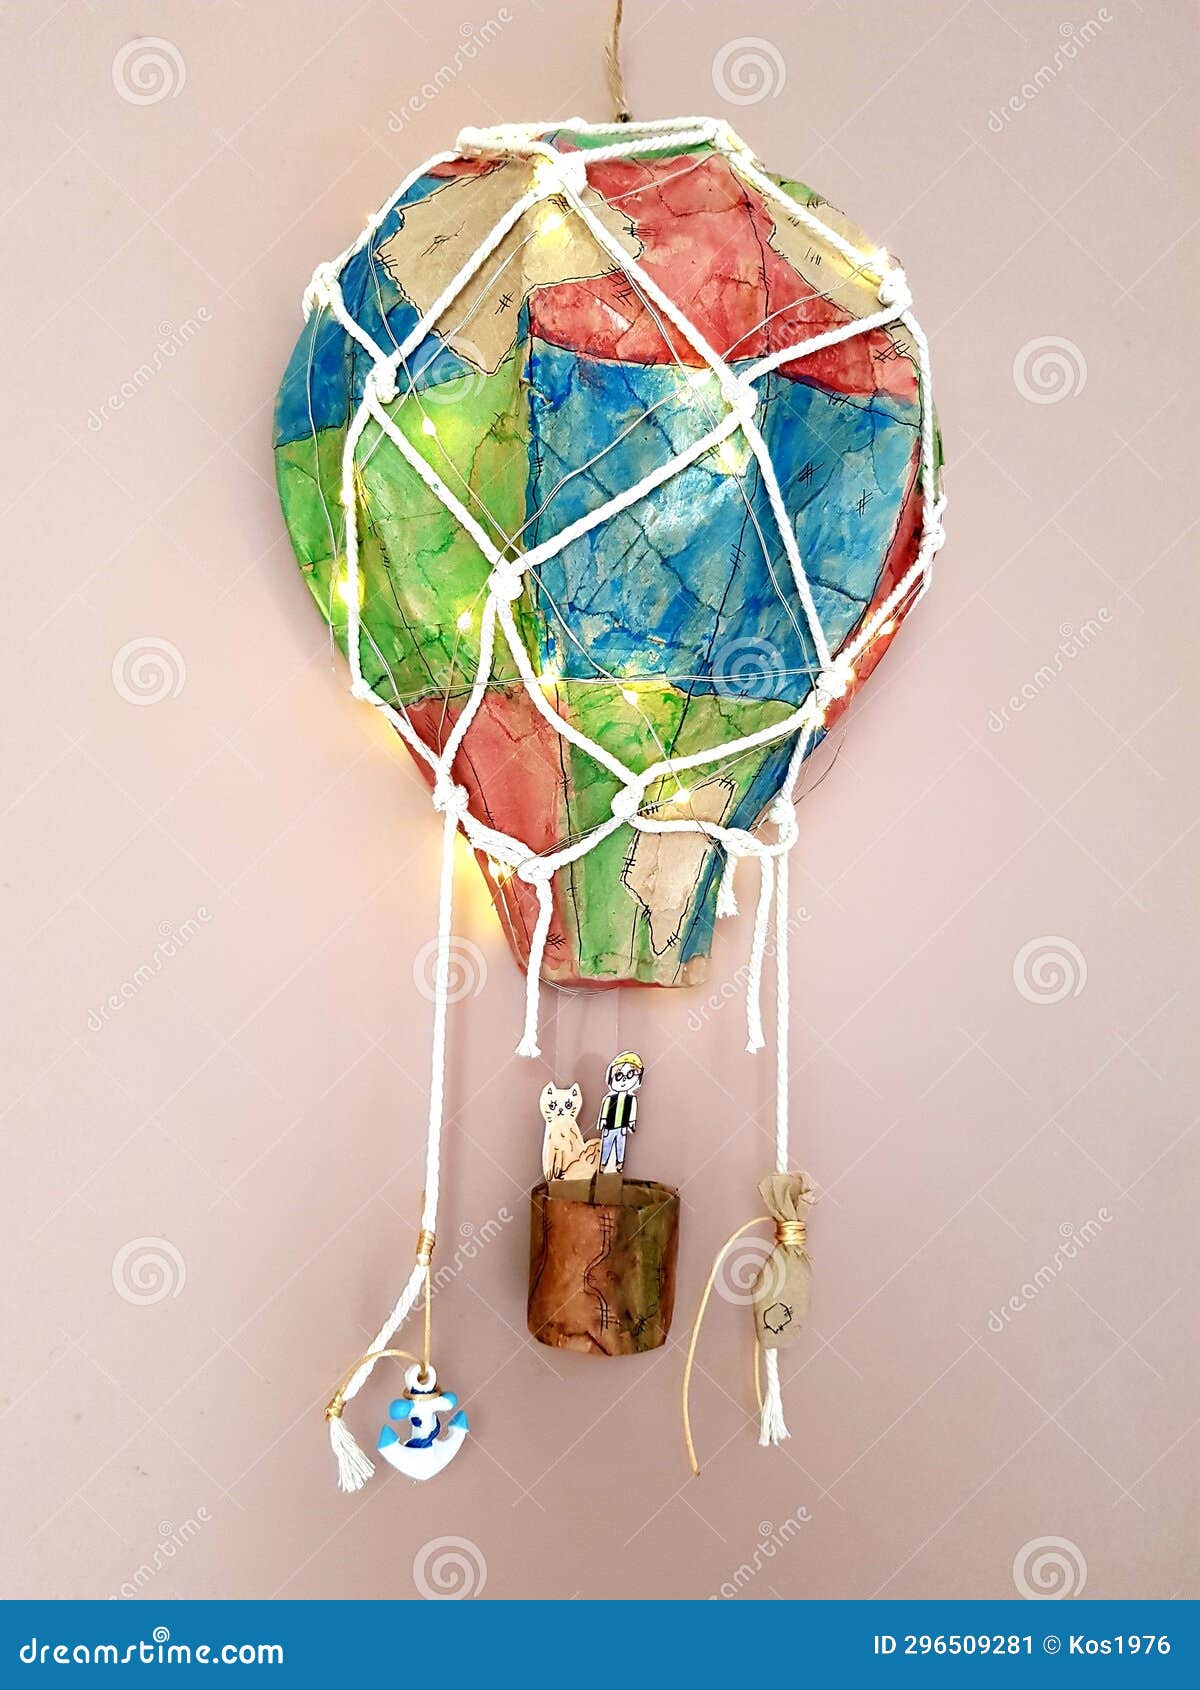 Colorful Balloon Hanging on a String. Colorful Handmade. Stock Image -  Image of handmade, food: 296509281